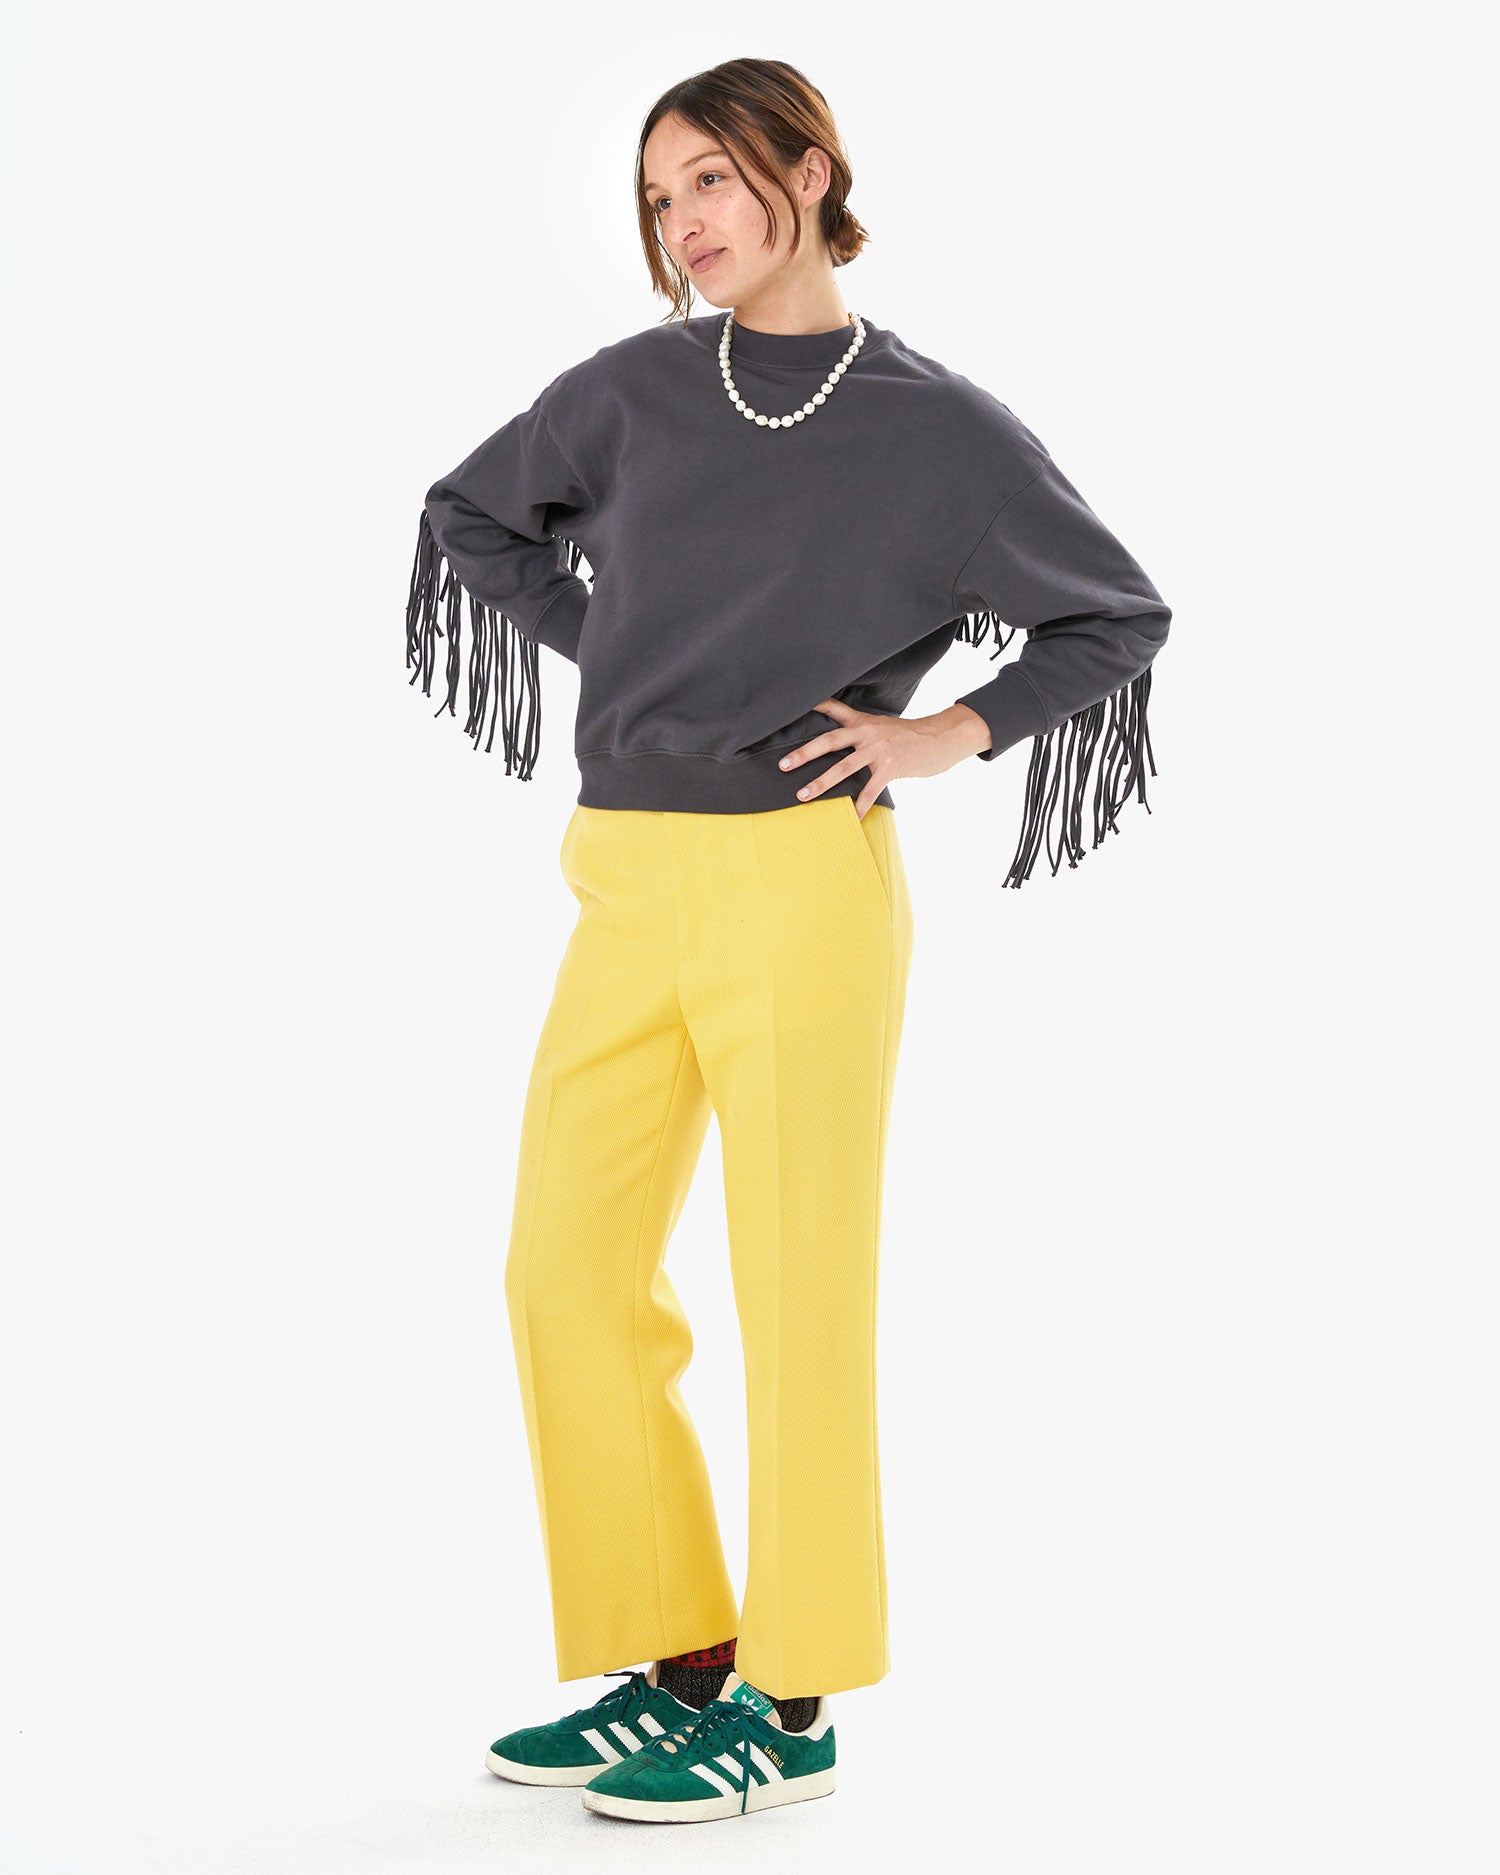 Zoe wearing the charcoal le drop fringe with yellow pants. She has her hands on her hips 